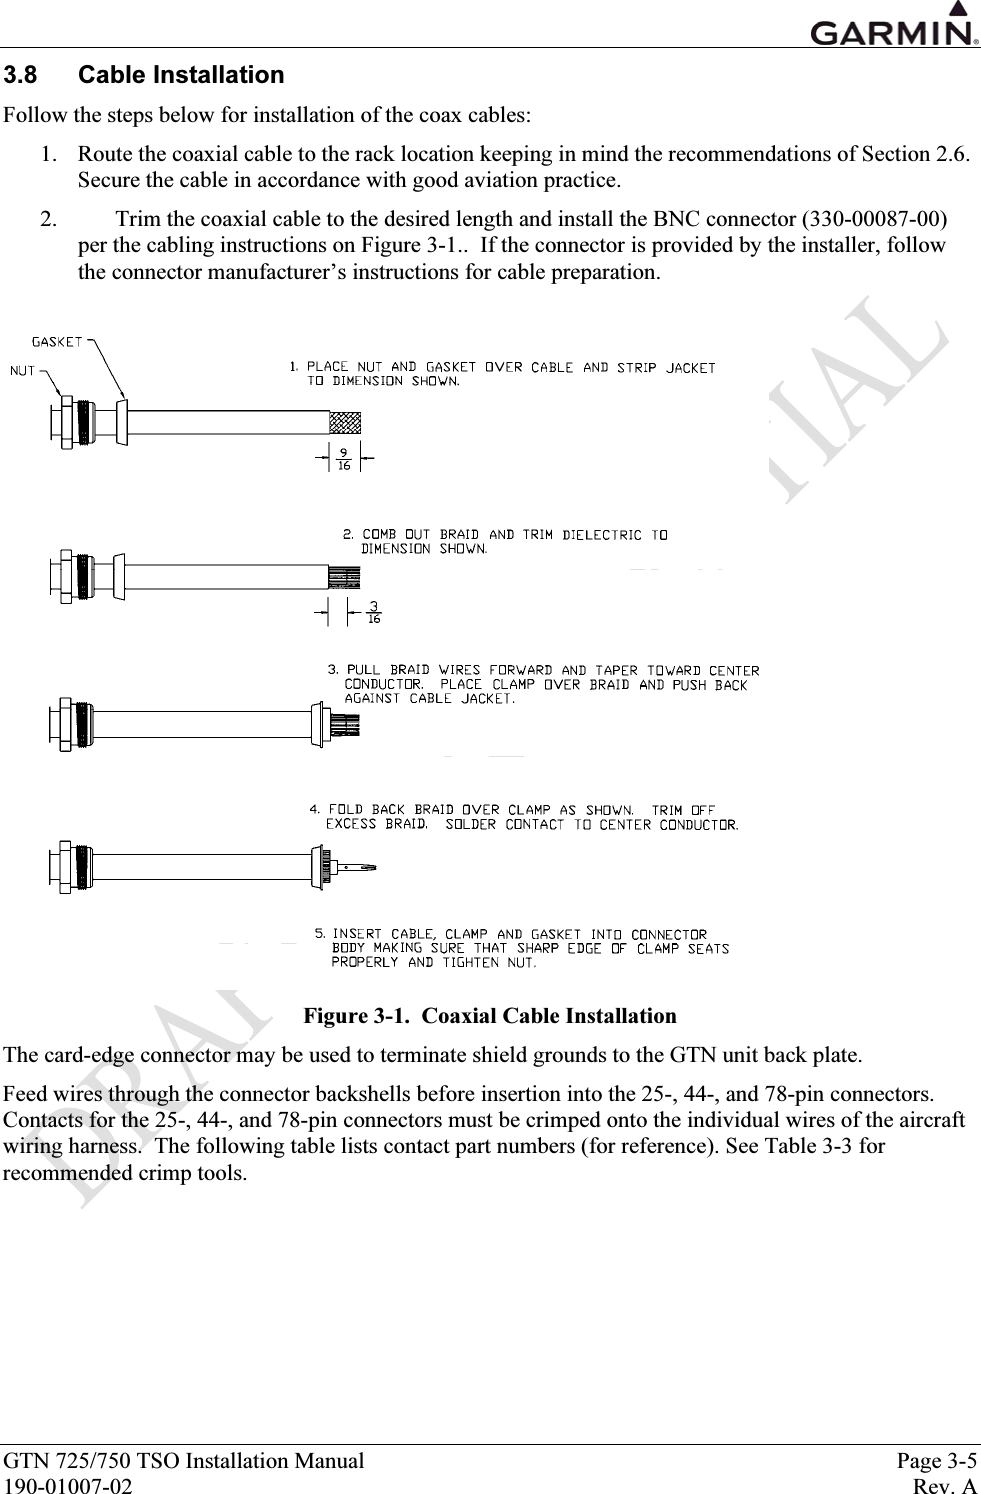  GTN 725/750 TSO Installation Manual  Page 3-5 190-01007-02  Rev. A 3.8 Cable Installation Follow the steps below for installation of the coax cables: 1. Route the coaxial cable to the rack location keeping in mind the recommendations of Section 2.6. Secure the cable in accordance with good aviation practice. 2. Trim the coaxial cable to the desired length and install the BNC connector (330-00087-00) per the cabling instructions on Figure 3-1..  If the connector is provided by the installer, follow the connector manufacturer’s instructions for cable preparation.   Figure 3-1.  Coaxial Cable Installation The card-edge connector may be used to terminate shield grounds to the GTN unit back plate. Feed wires through the connector backshells before insertion into the 25-, 44-, and 78-pin connectors. Contacts for the 25-, 44-, and 78-pin connectors must be crimped onto the individual wires of the aircraft wiring harness.  The following table lists contact part numbers (for reference). See Table 3-3 for recommended crimp tools. 